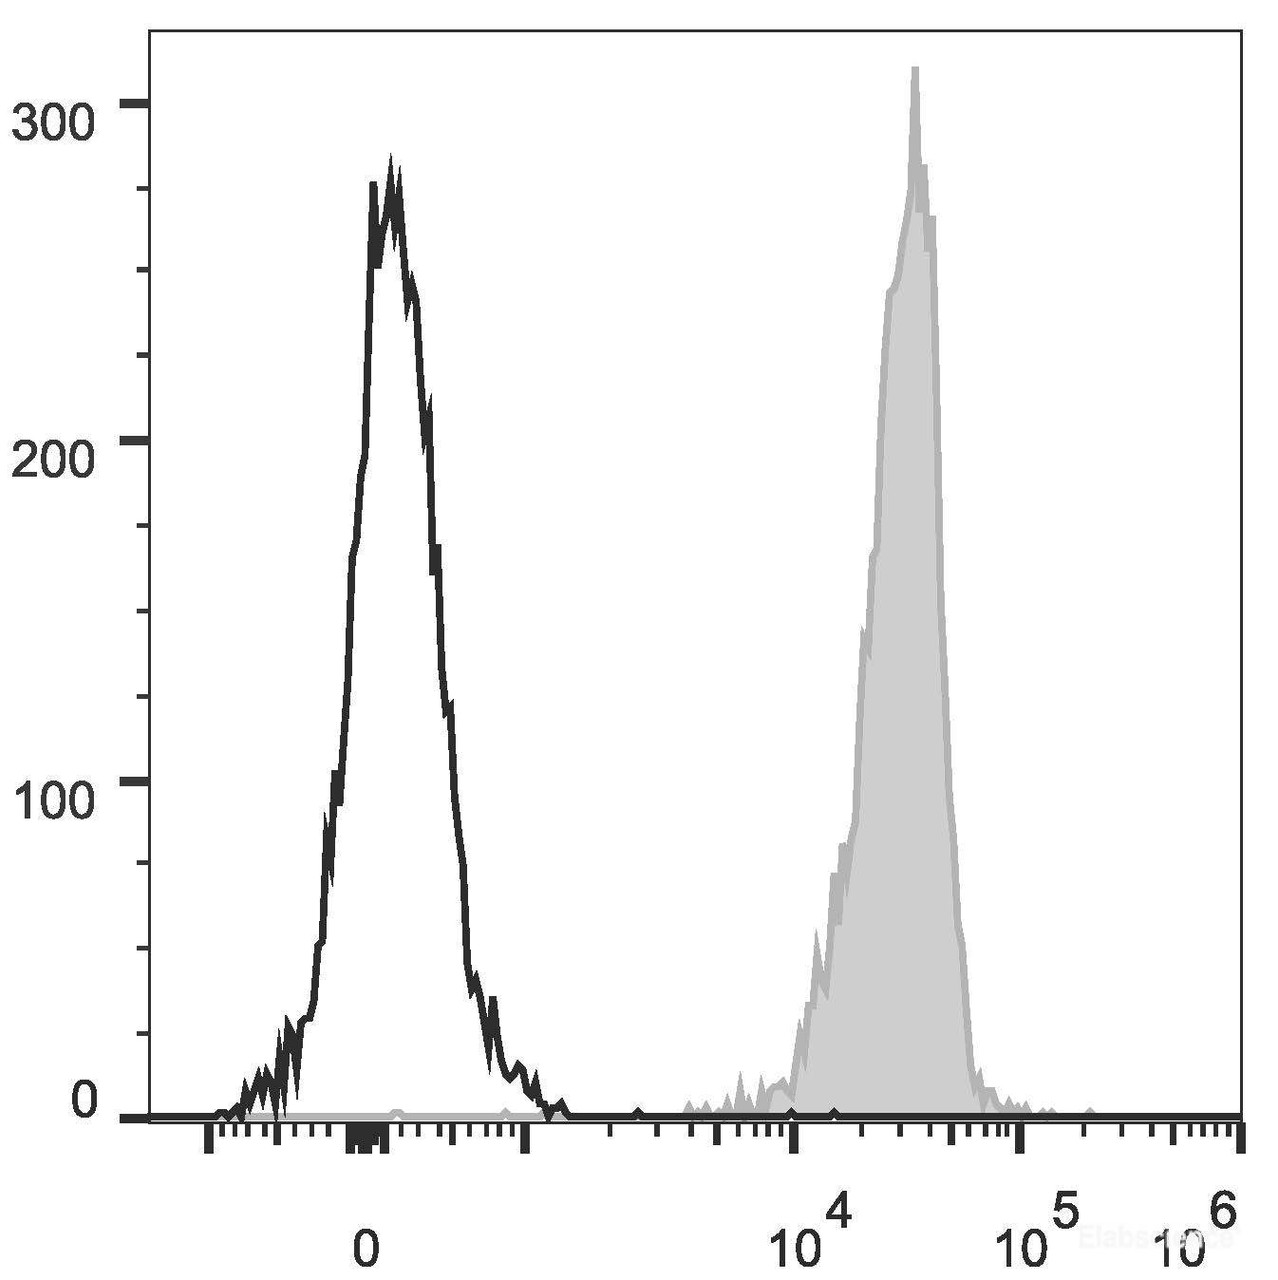 C57BL/6 murine splenocytes are stained with PE/Cyanine5 Anti-Mouse CD45 Antibody[Used at .2 μg/1<sup>6</sup> cells dilution](filled gray histogram). Unstained splenocytes (empty black histogram) are used as control.